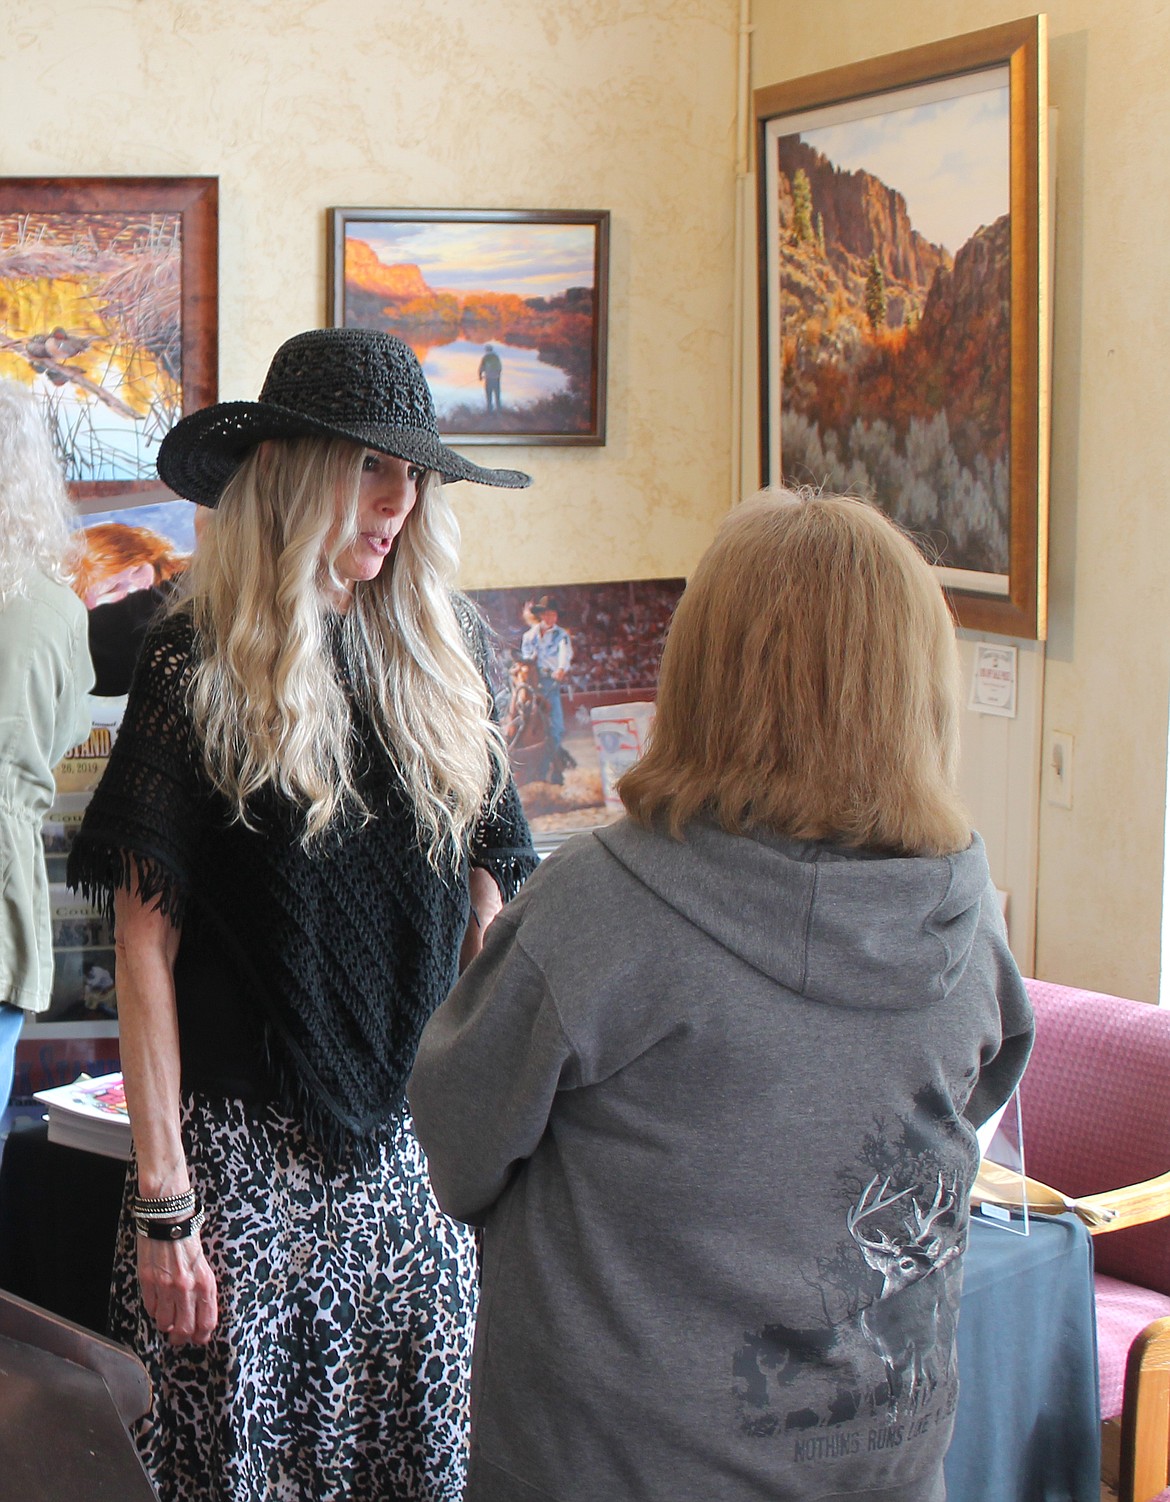 Author Lyn D. Nielsen, left, chats with Nancy Winterooth at Cariboo Trail Studio in Coulee City April 1. Nielsen was signing books as part of the April Fools Art Walk.